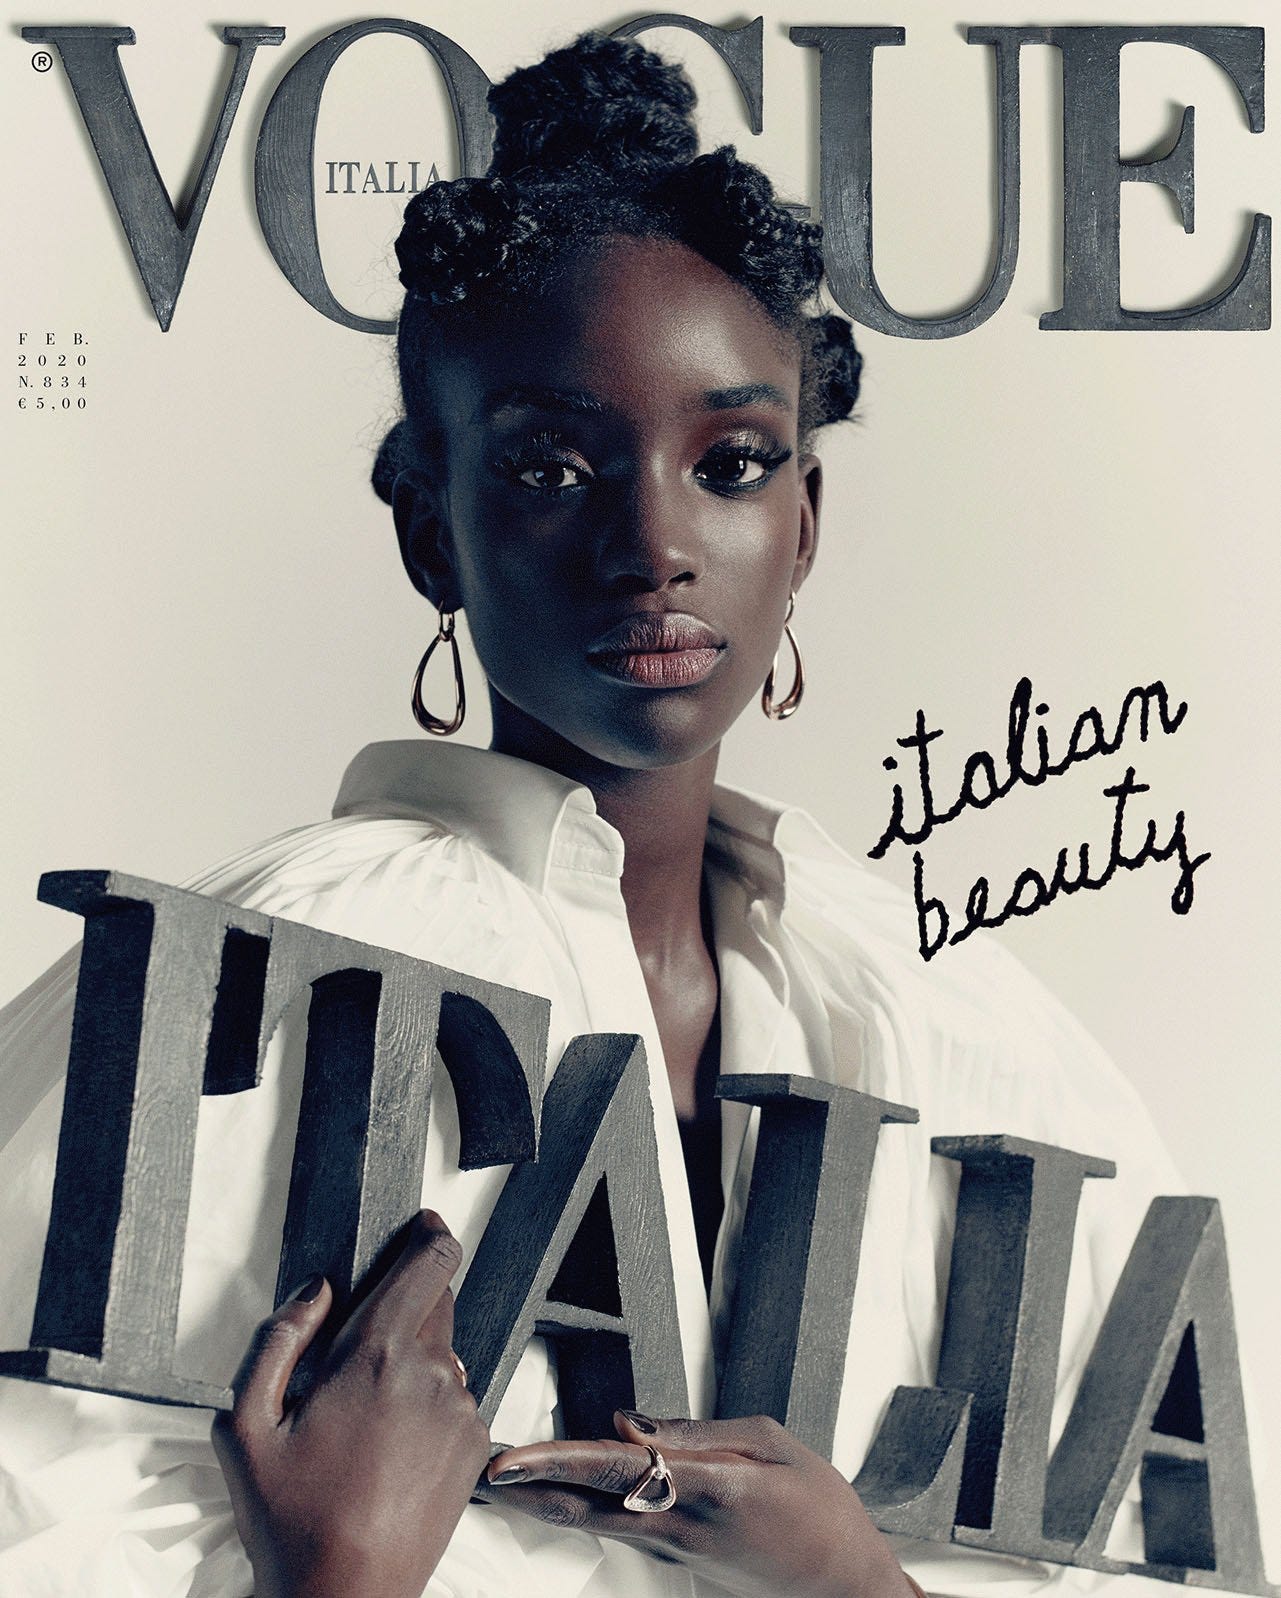 Italian Beauty | The Vogue Italia cover with Maty Fall is not just a cover  - GRIOT